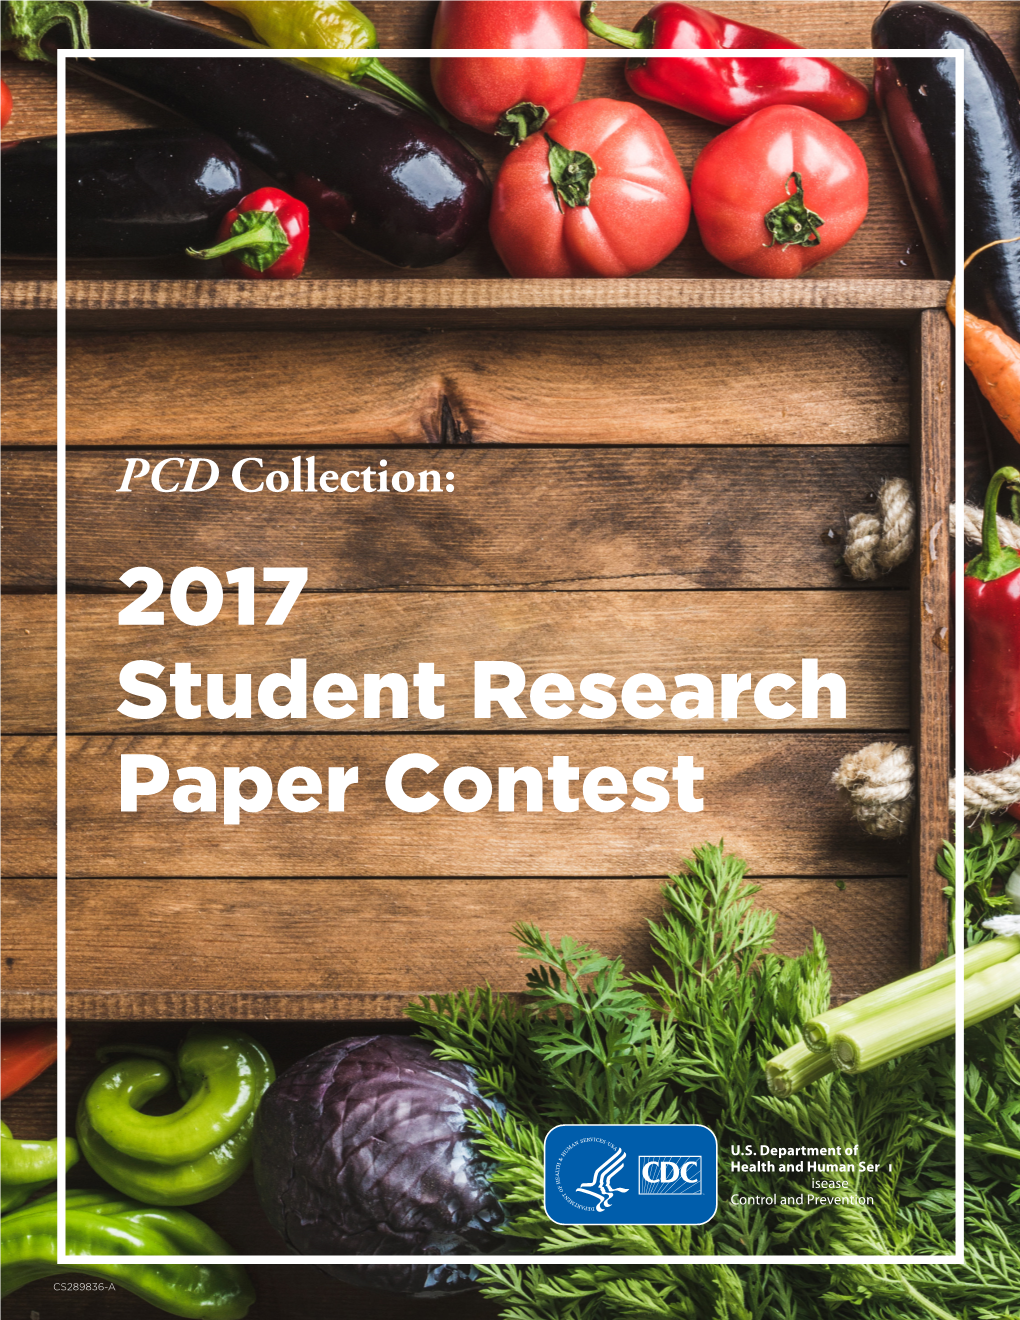 PCD Collection: 2017 Student Research Paper Contest